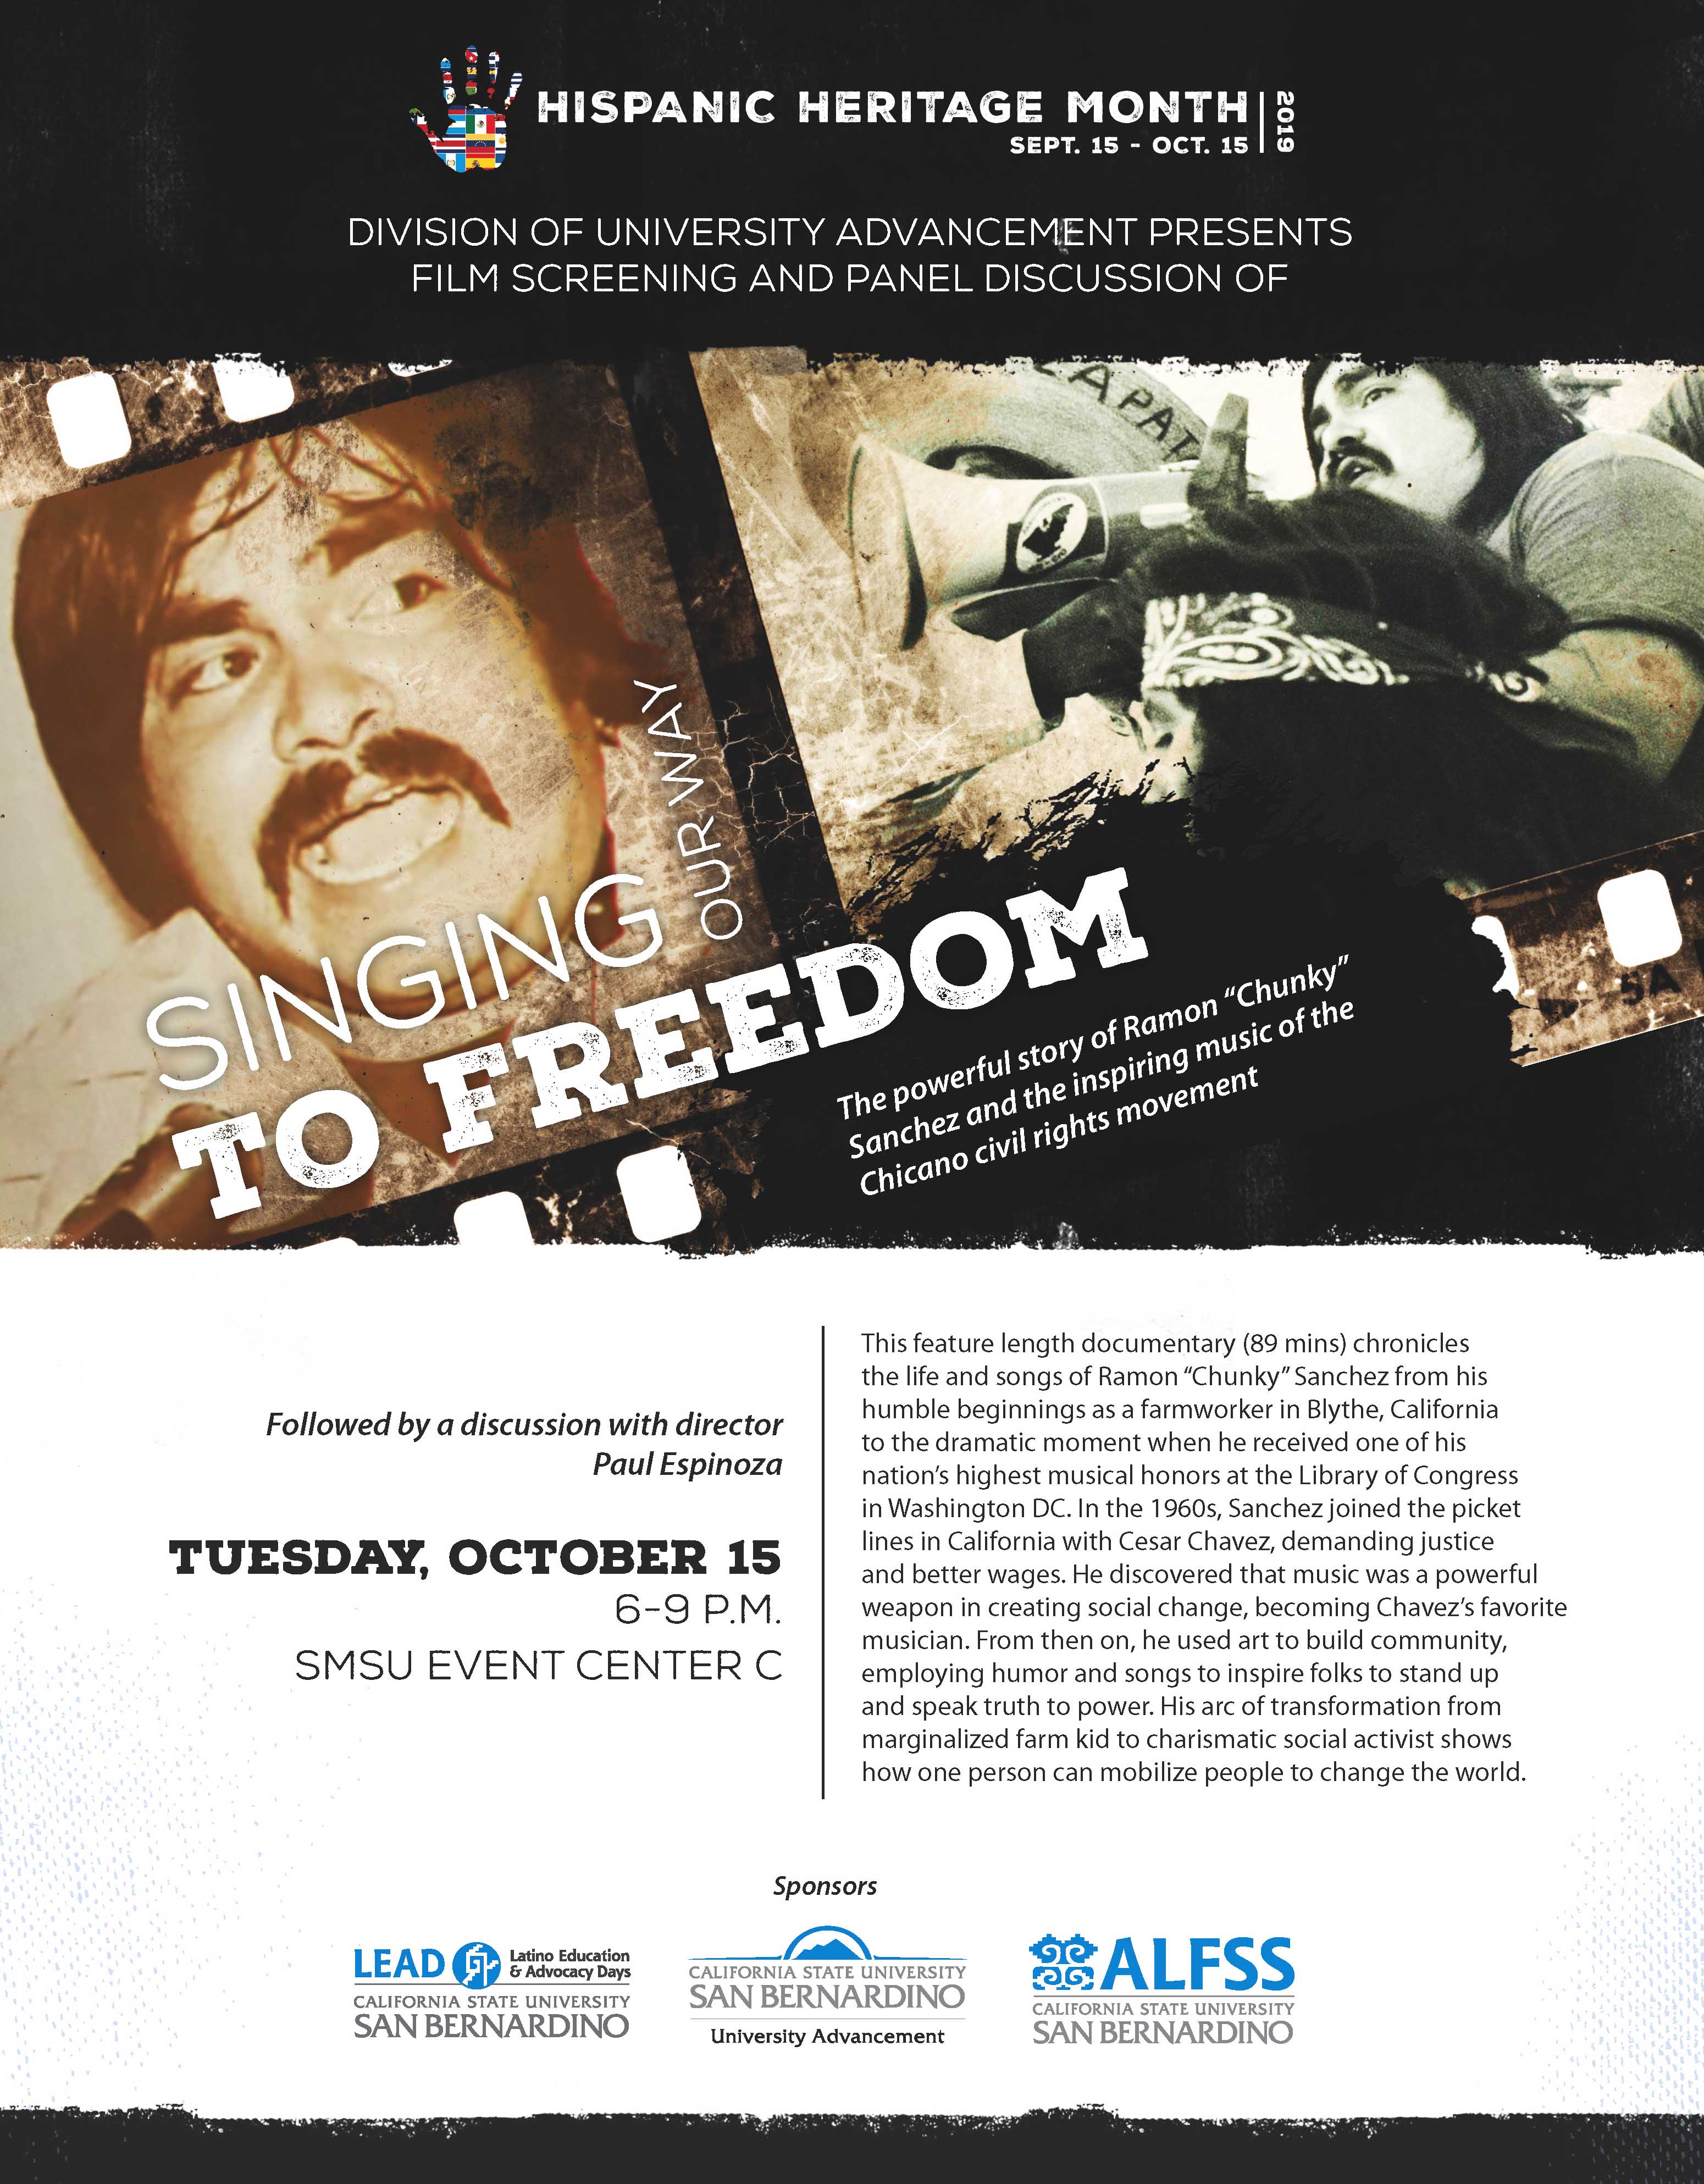 Documentary ‘Singing Our Way to Freedom’ to be shown Oct. 15 at CSUSB (flier)